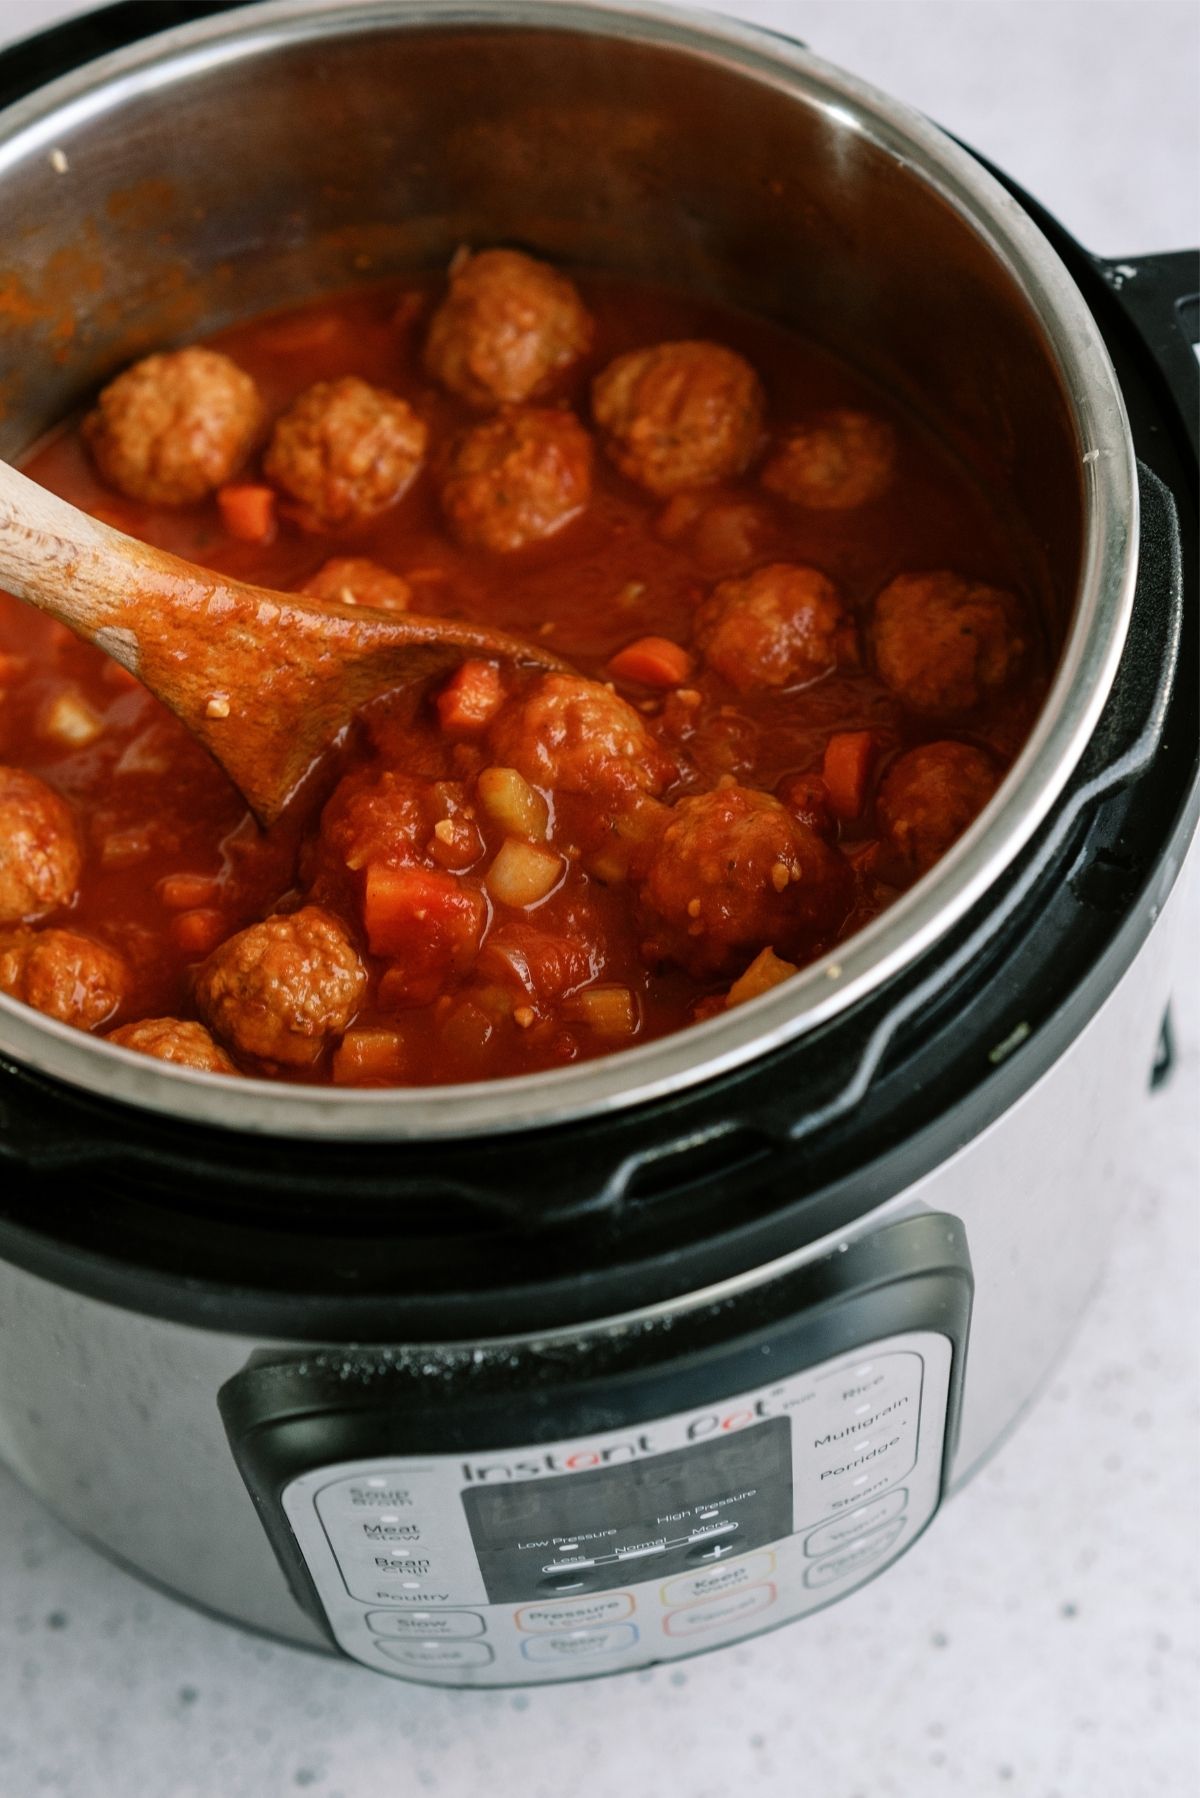 Instant Pot Dump and Go Meatball Soup in the instant pot with a wooden spoon